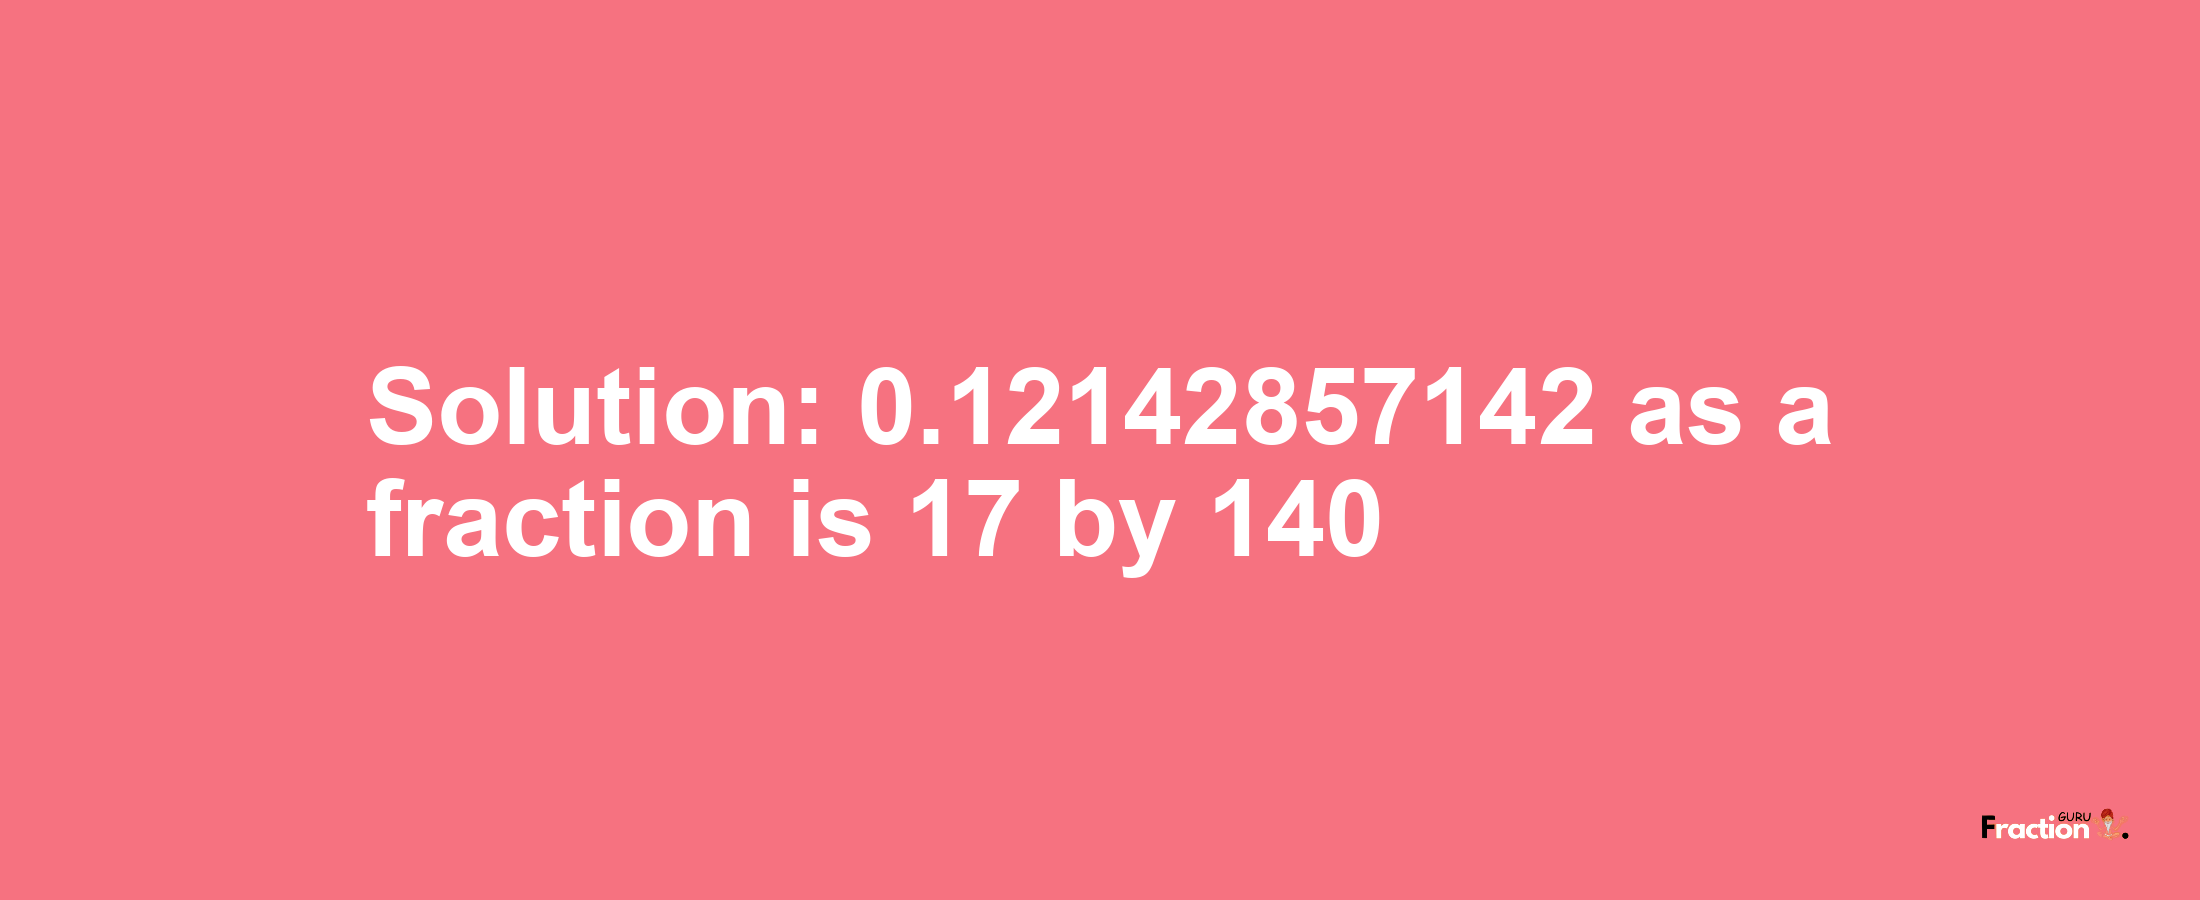 Solution:0.12142857142 as a fraction is 17/140